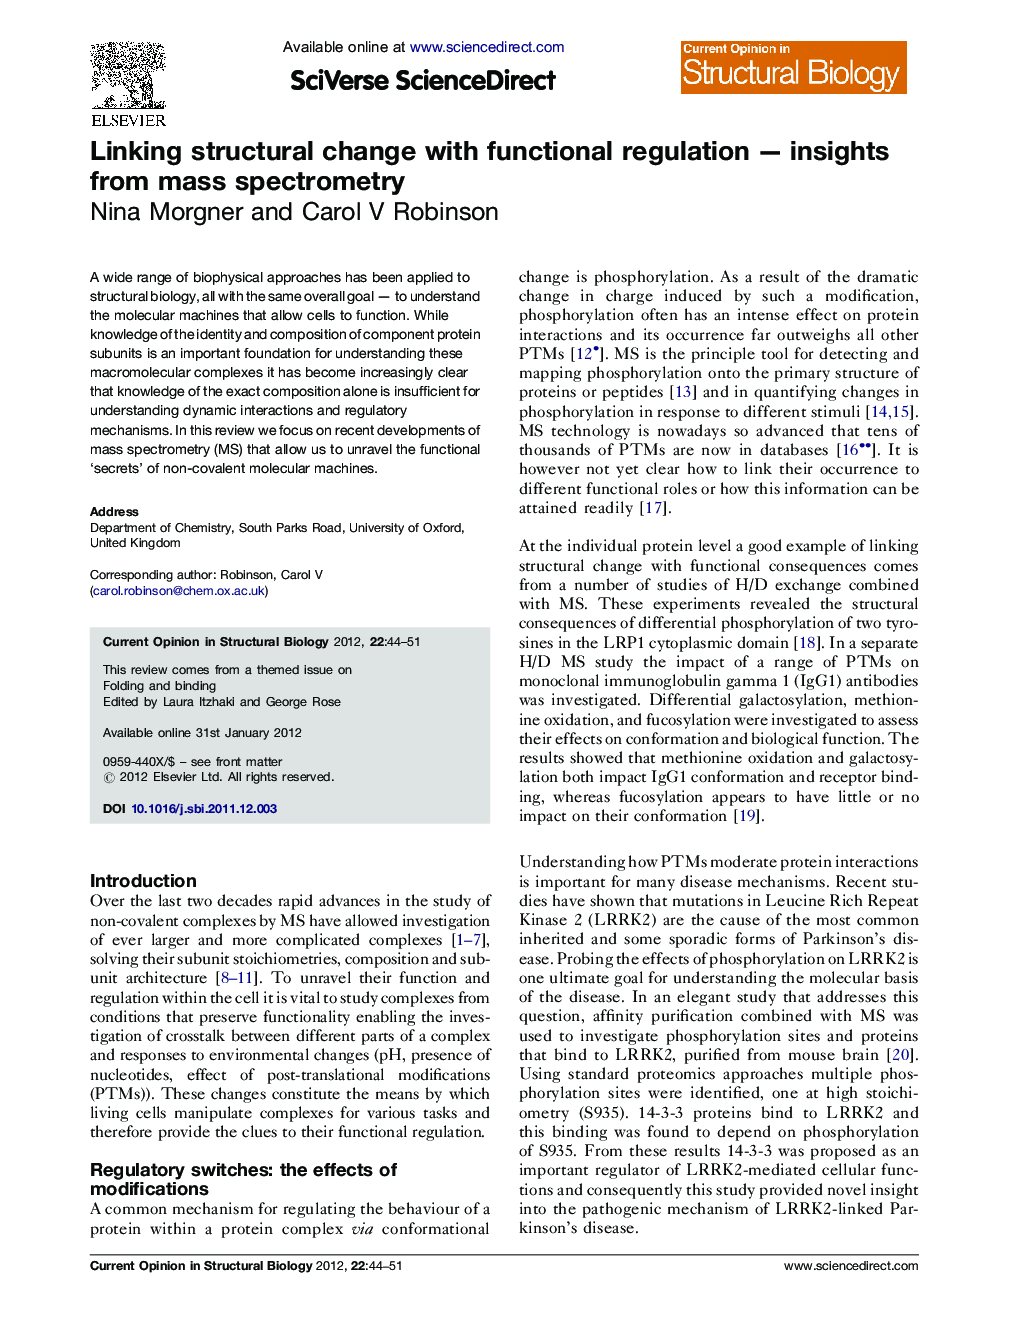 Linking structural change with functional regulation — insights from mass spectrometry